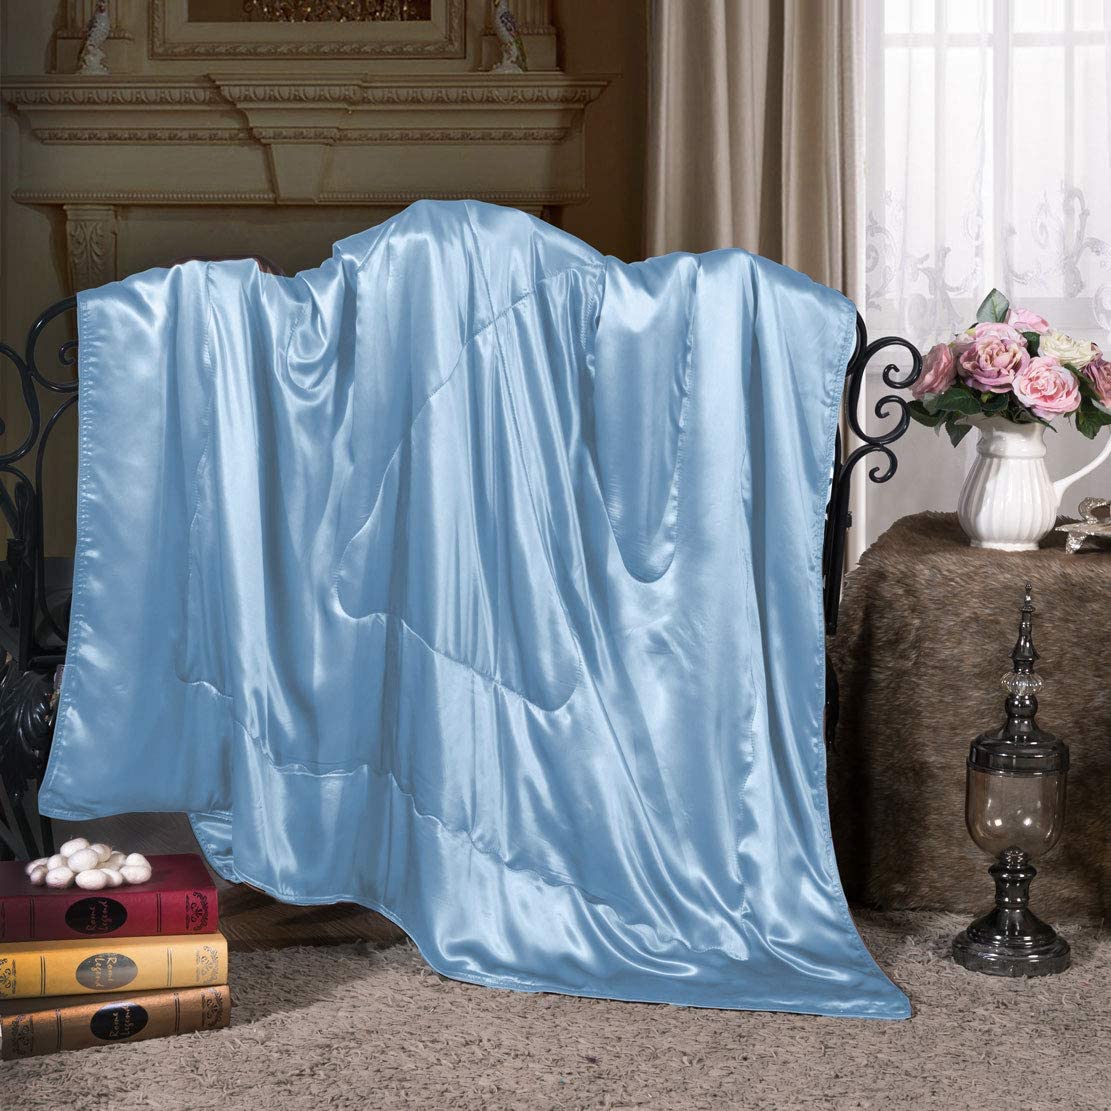 thumbnail 6 - Cozysilk Pure Silk Throw Blanket, 100% Mulberry Silk Inside and Outside, Pure Si